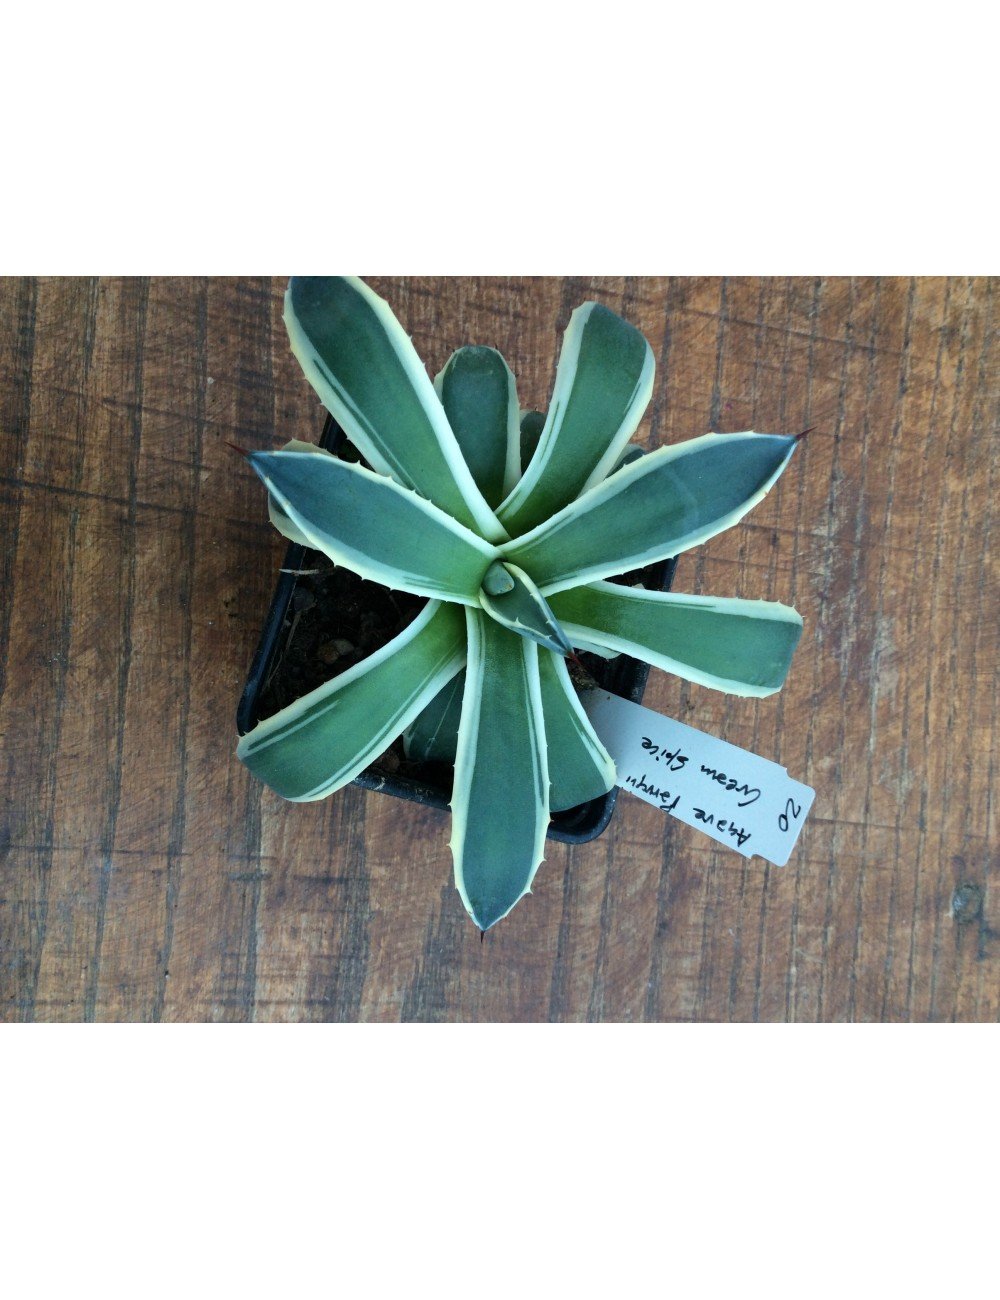 Agave Parryi Cram Spice